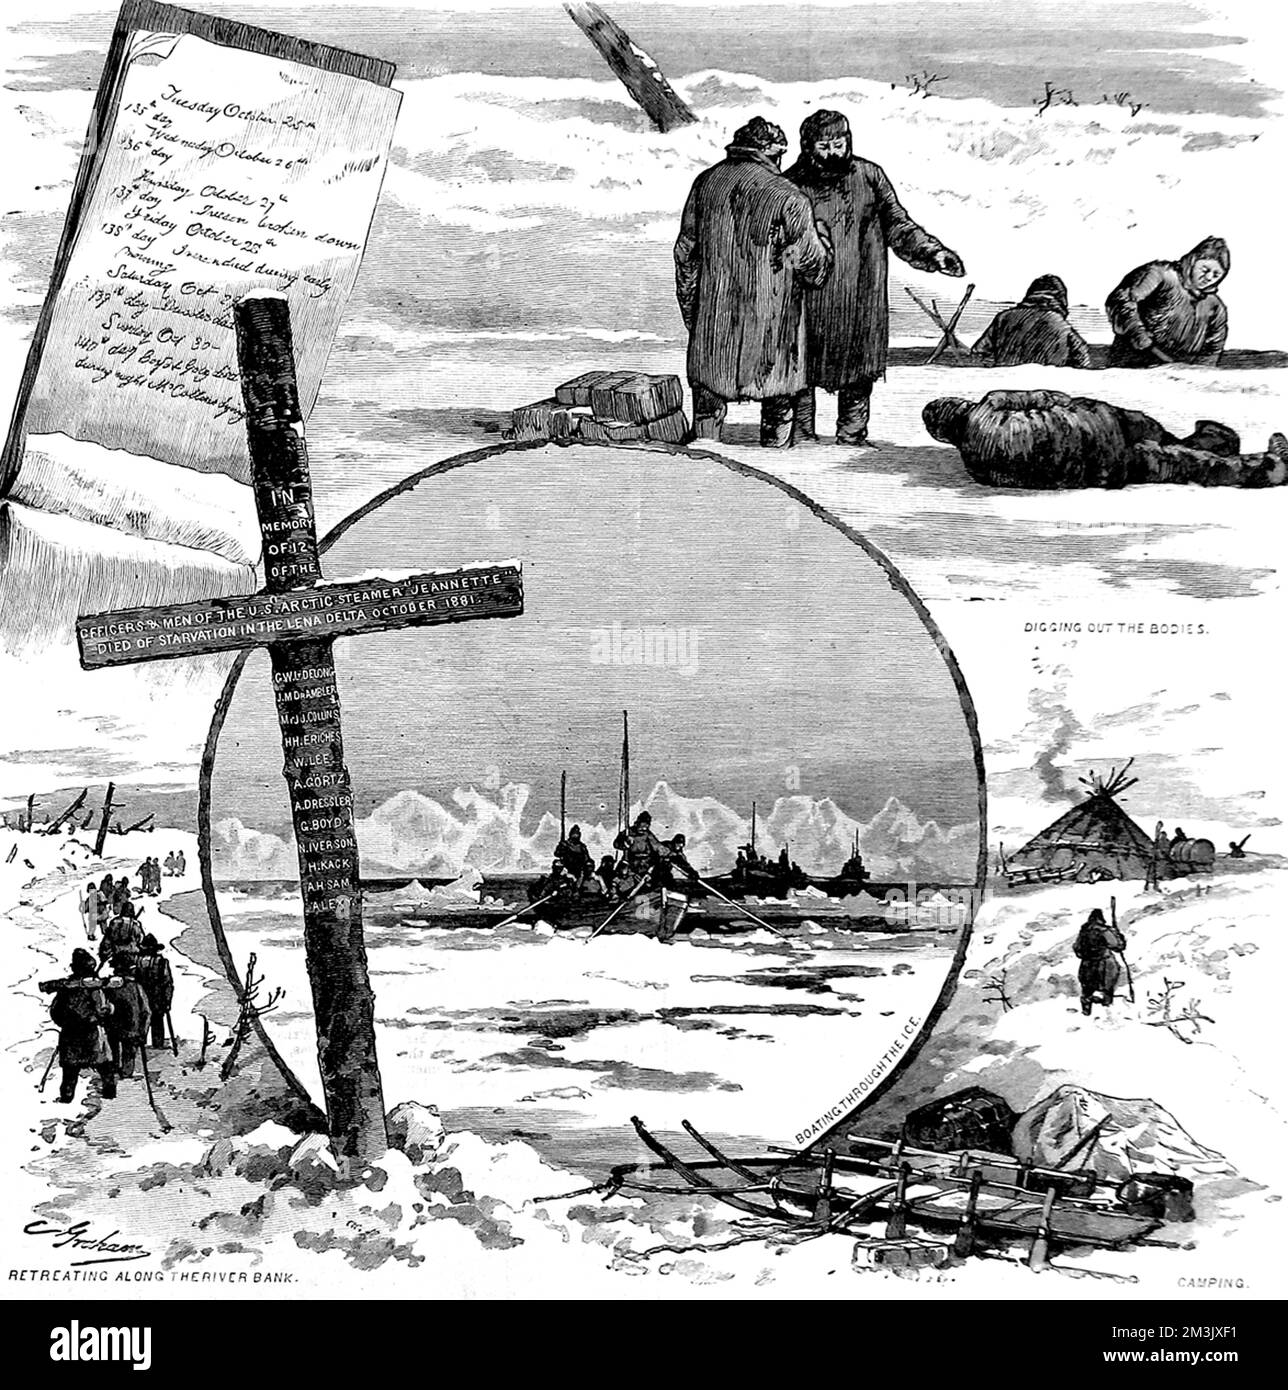 A team of survivors of the 'Jeannette' Arctic Expedition looking for their missing and dead comrades. This team, led by Chief Engineer Melville, found the bodies of Captain Delong and 12 others and erected the cross, at the Lena River Delta, in their memory.  In 1879, an US Navy crew, led by Lieutenant Commander George Washington Delong, embarked aboard the private yacht 'Jeannnette' in an attempt to sail to the North Pole. The 'Jeannette' entered the ice pack, near Wrangell Island, in September 1879 and then drifted north-west, surrounded by ice until June 1881.  On the 12th June, the  Stock Photo